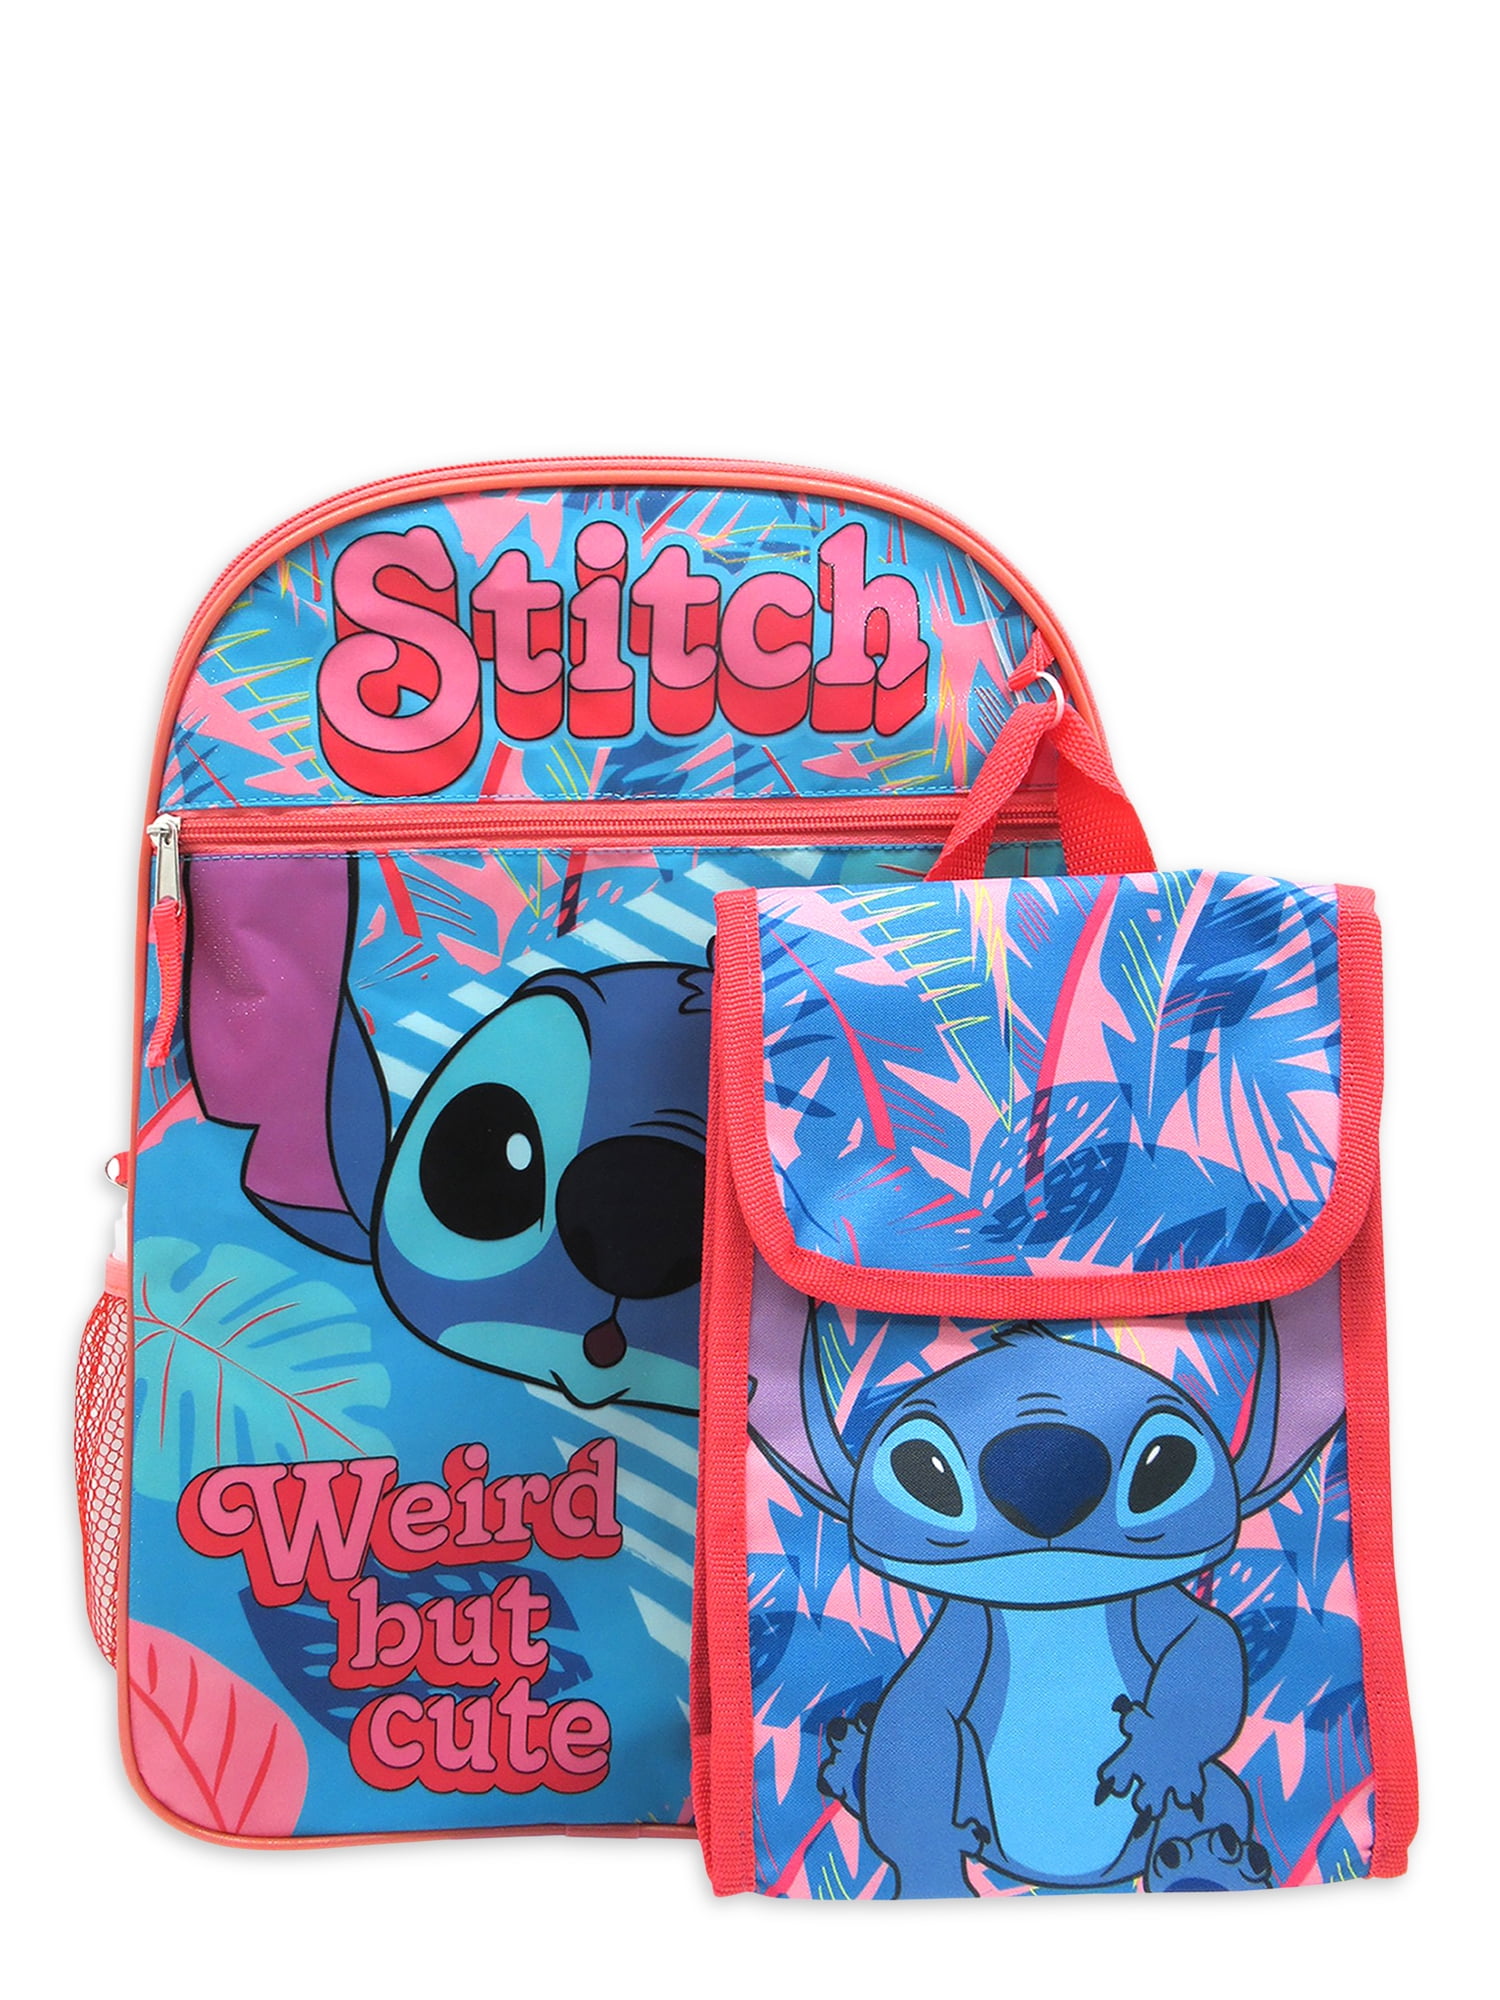 Disney Lilo and Stitch Backpack and Lunch Box Bundle Indonesia